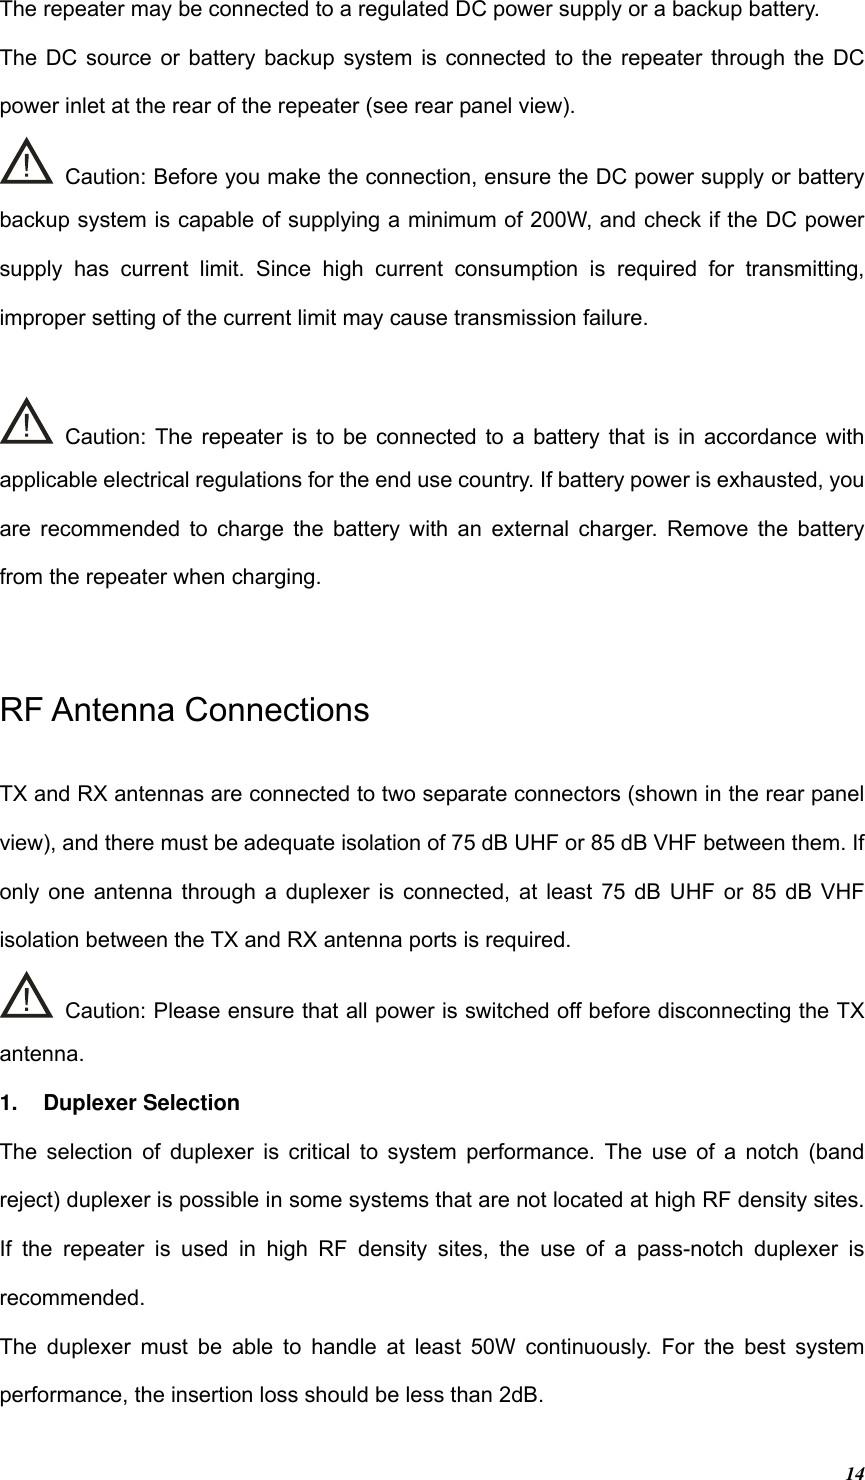 Page 15 of Hytera Communications RD98XSIU1 Digital Repeater User Manual RD98XS Owner s Manual 100202